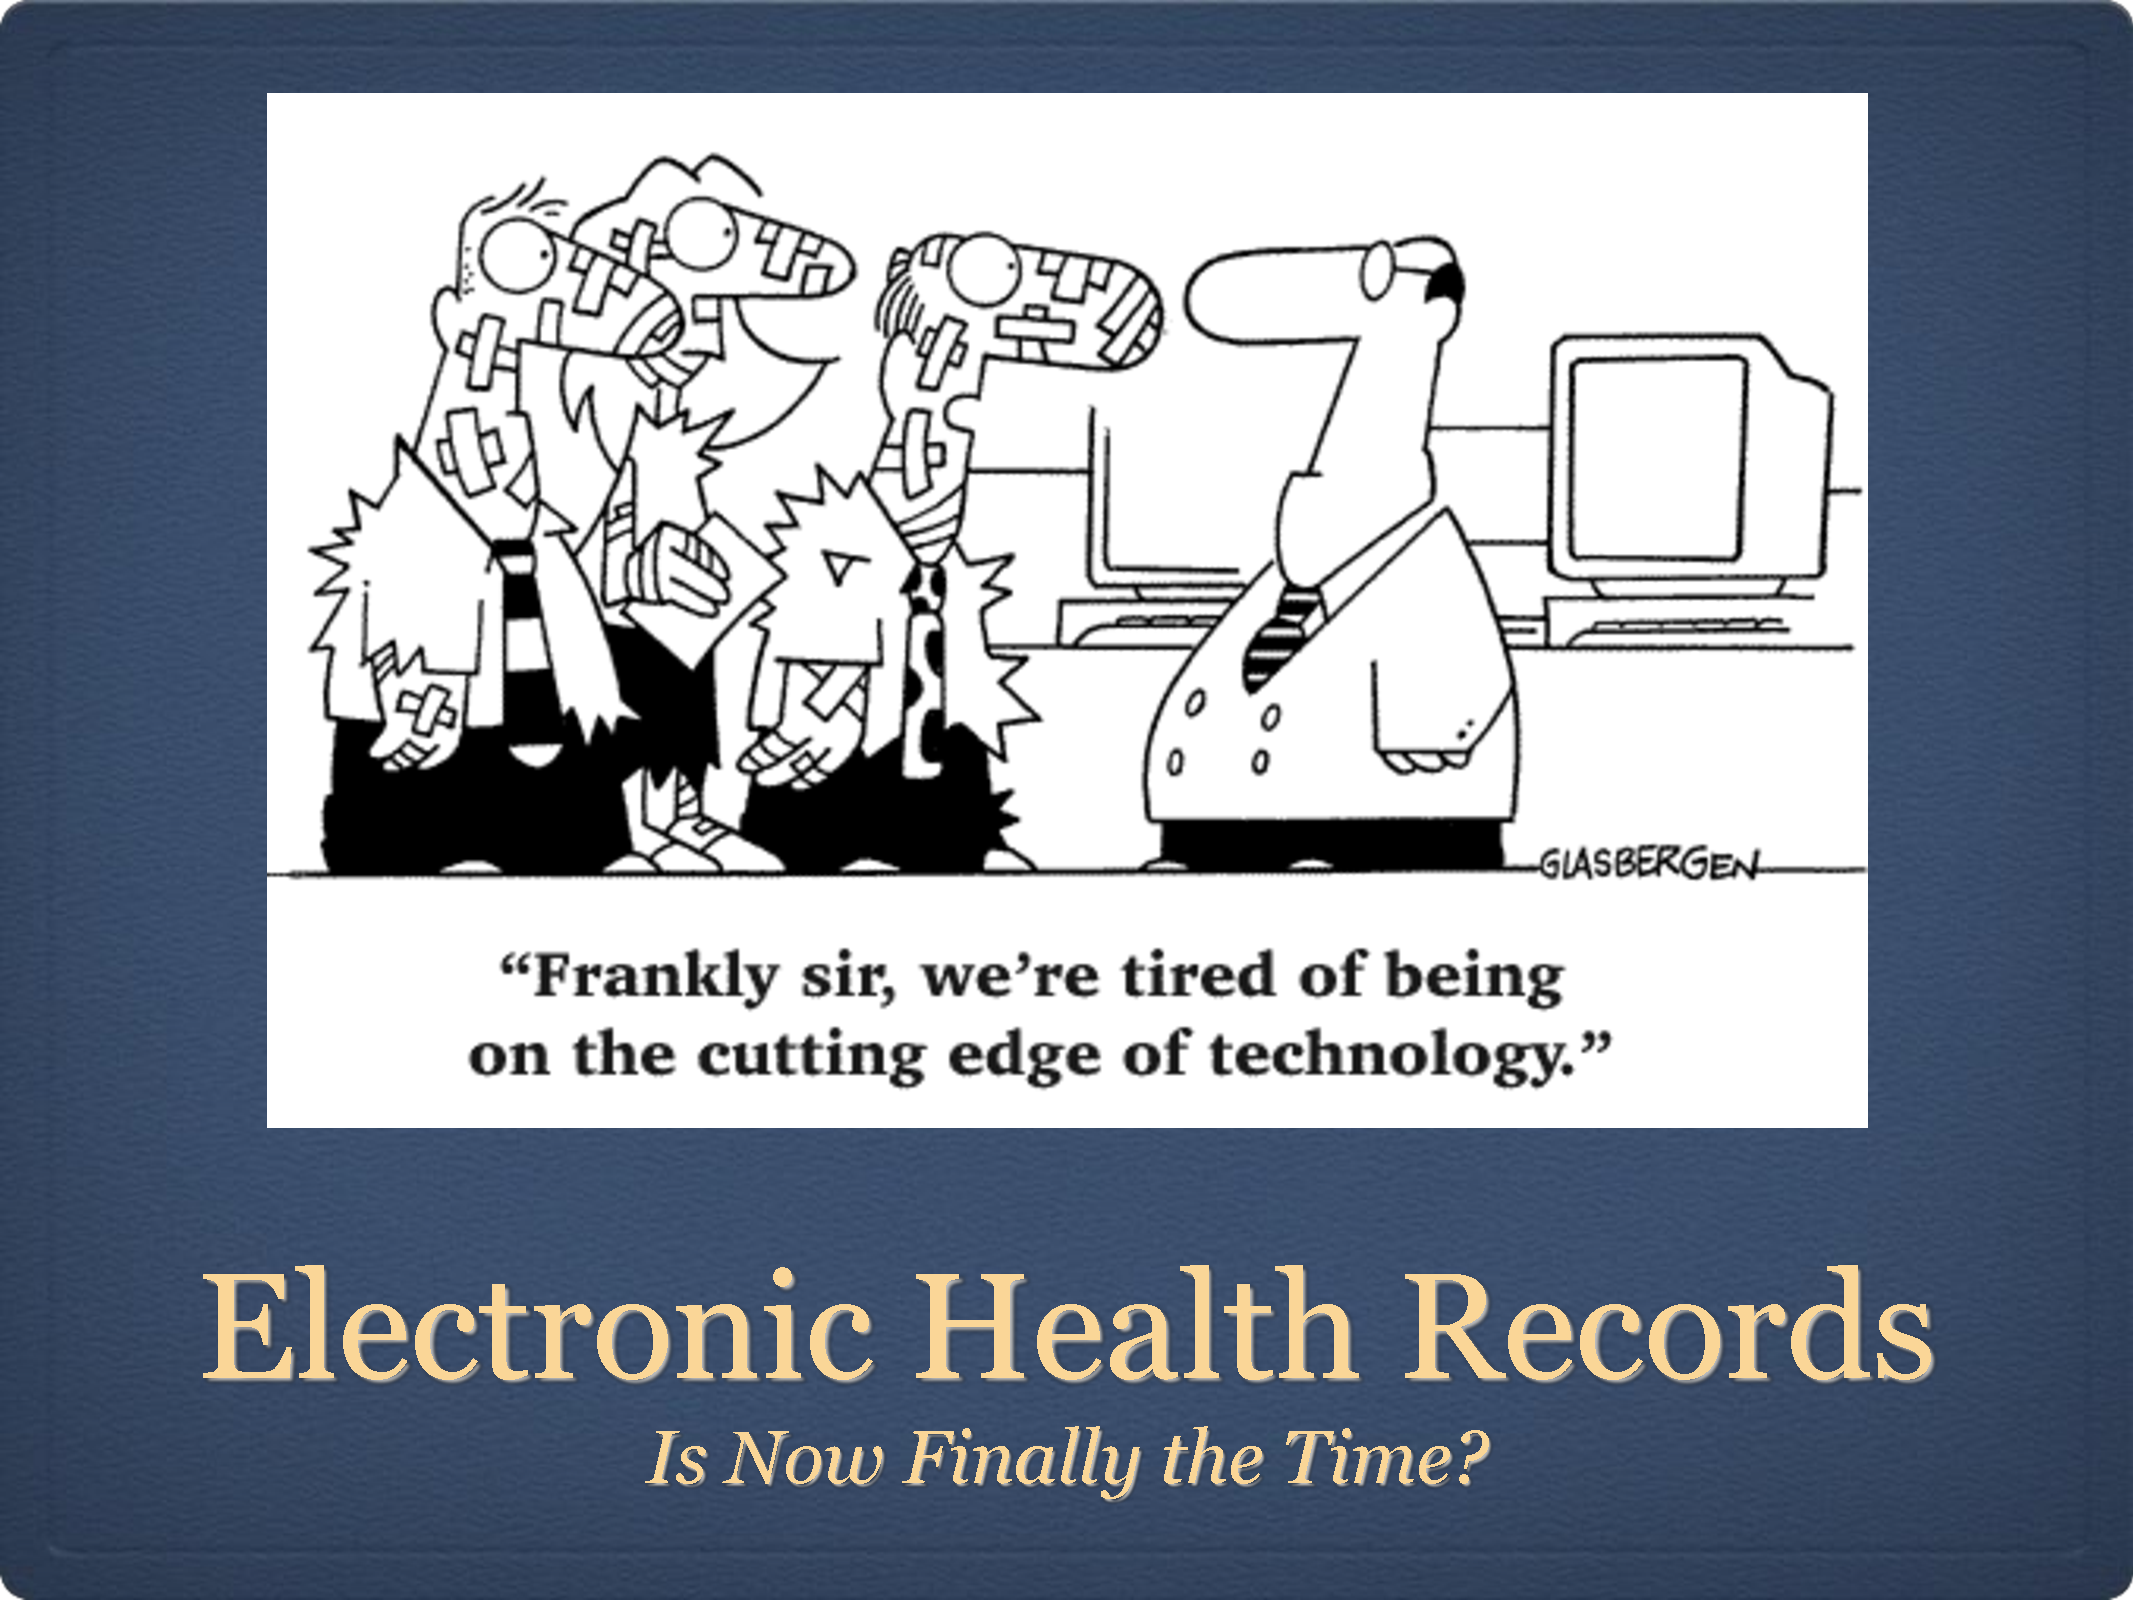 record clipart medical chart